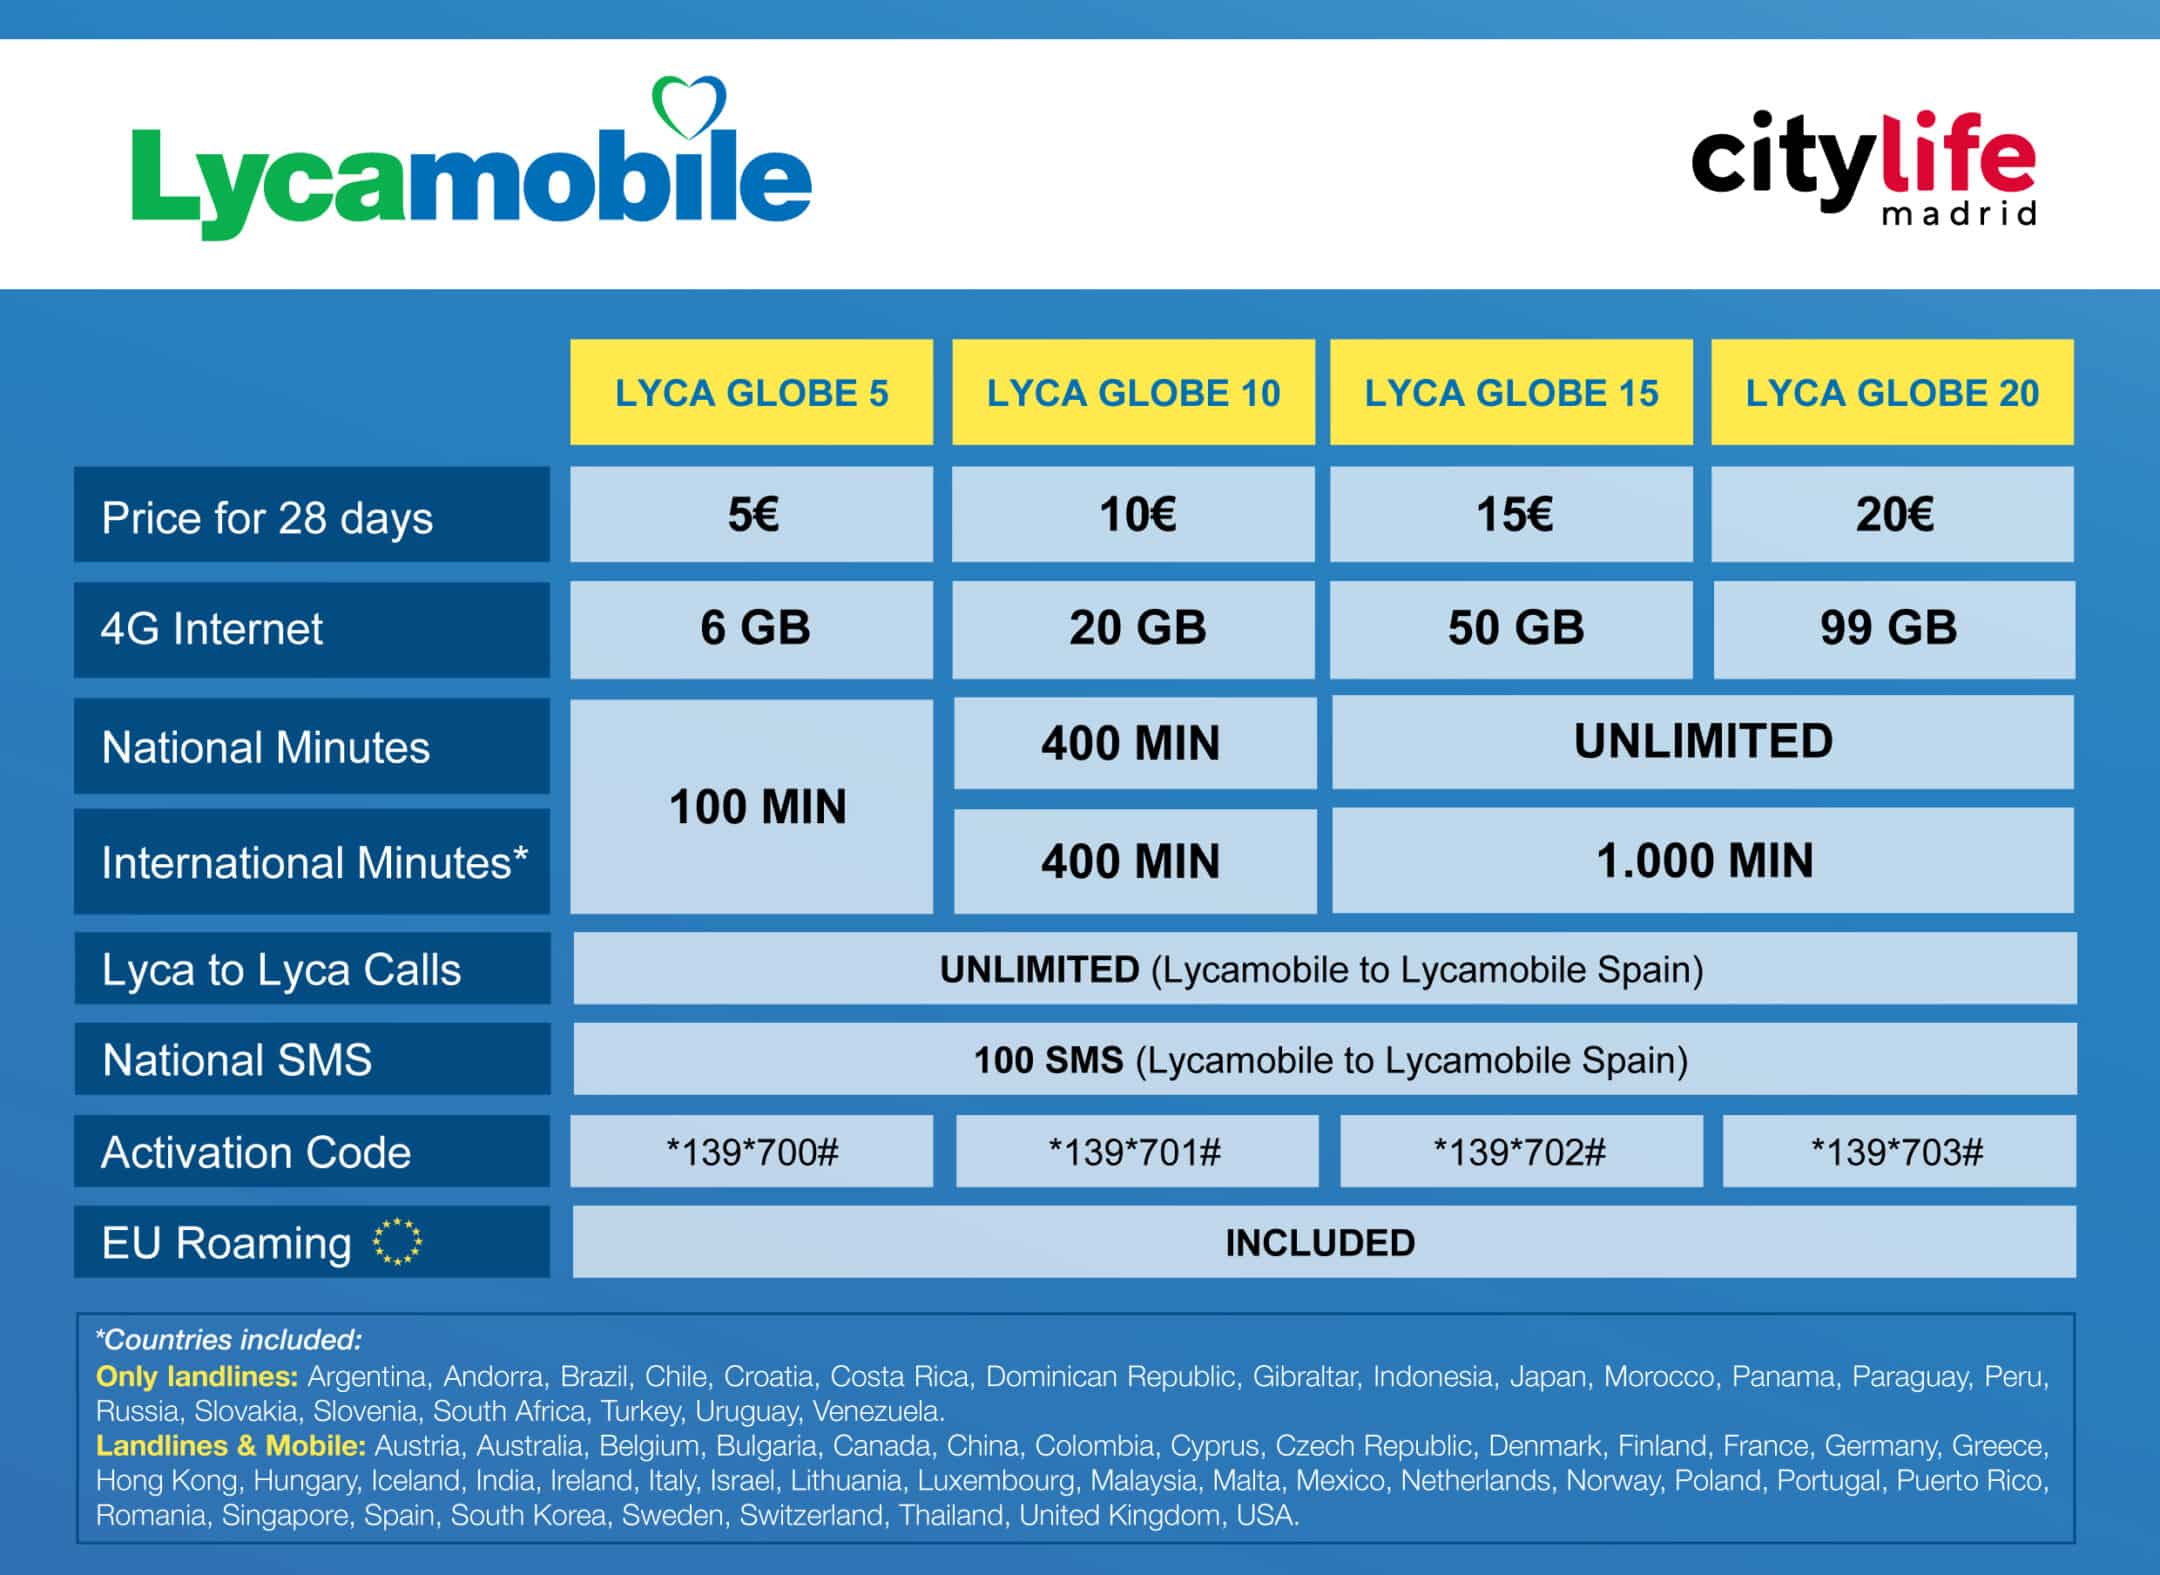 pay-as-you-go-sim-card-lycamobile-flyer-offers-citylife-madrid